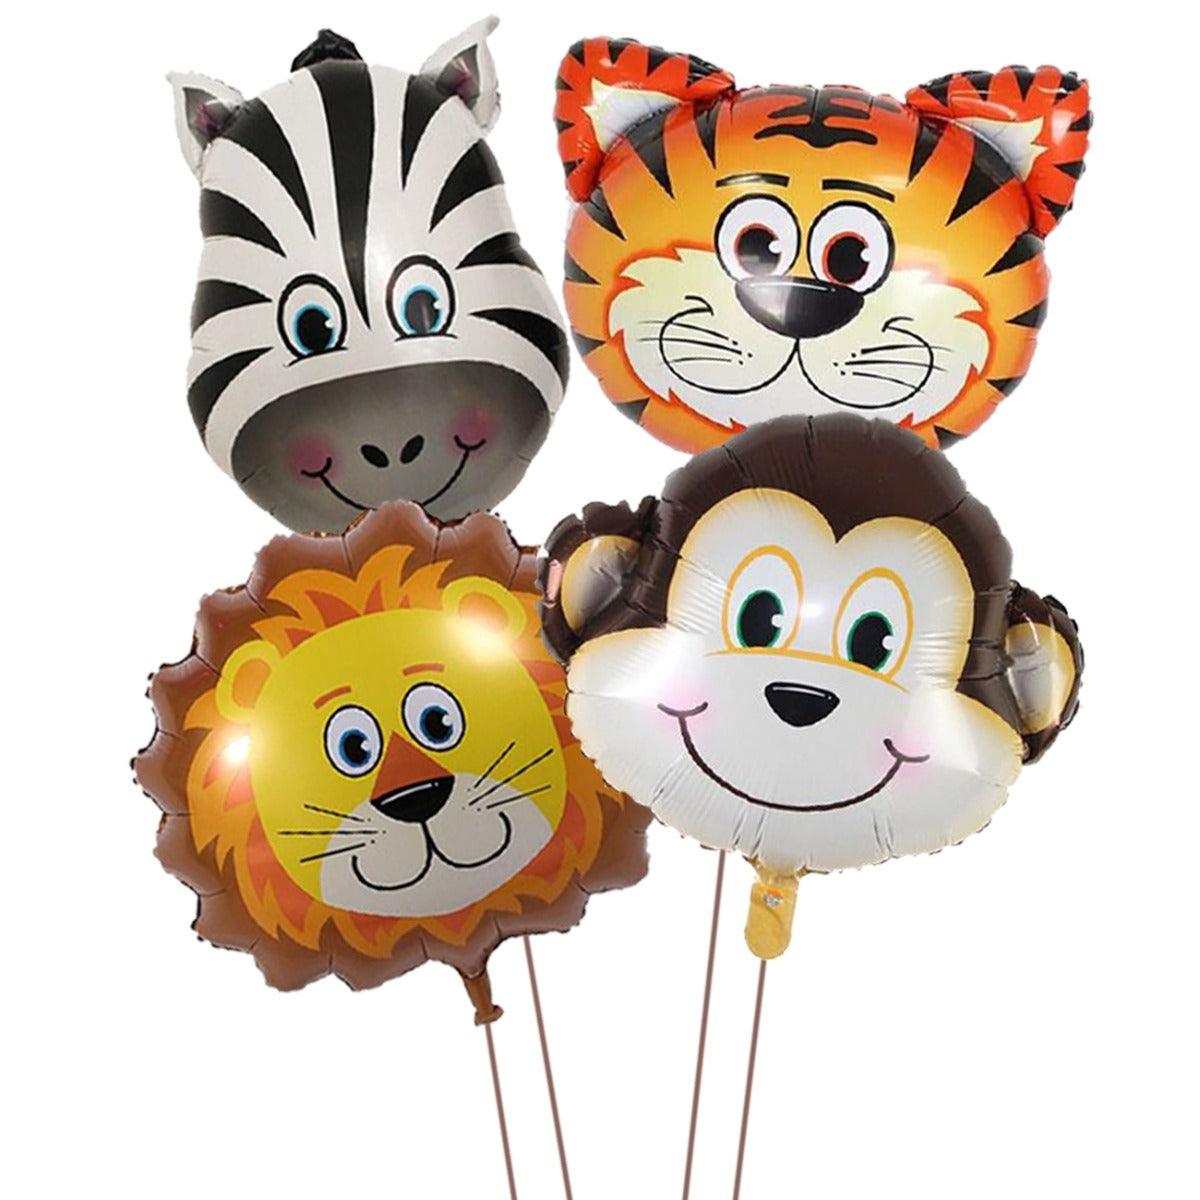 PartyCorp Animal Head Shaped Foil Balloons, Jungle Theme Decoration (Tiger, Lion, Monkey, Zebra) - Pack Of 4